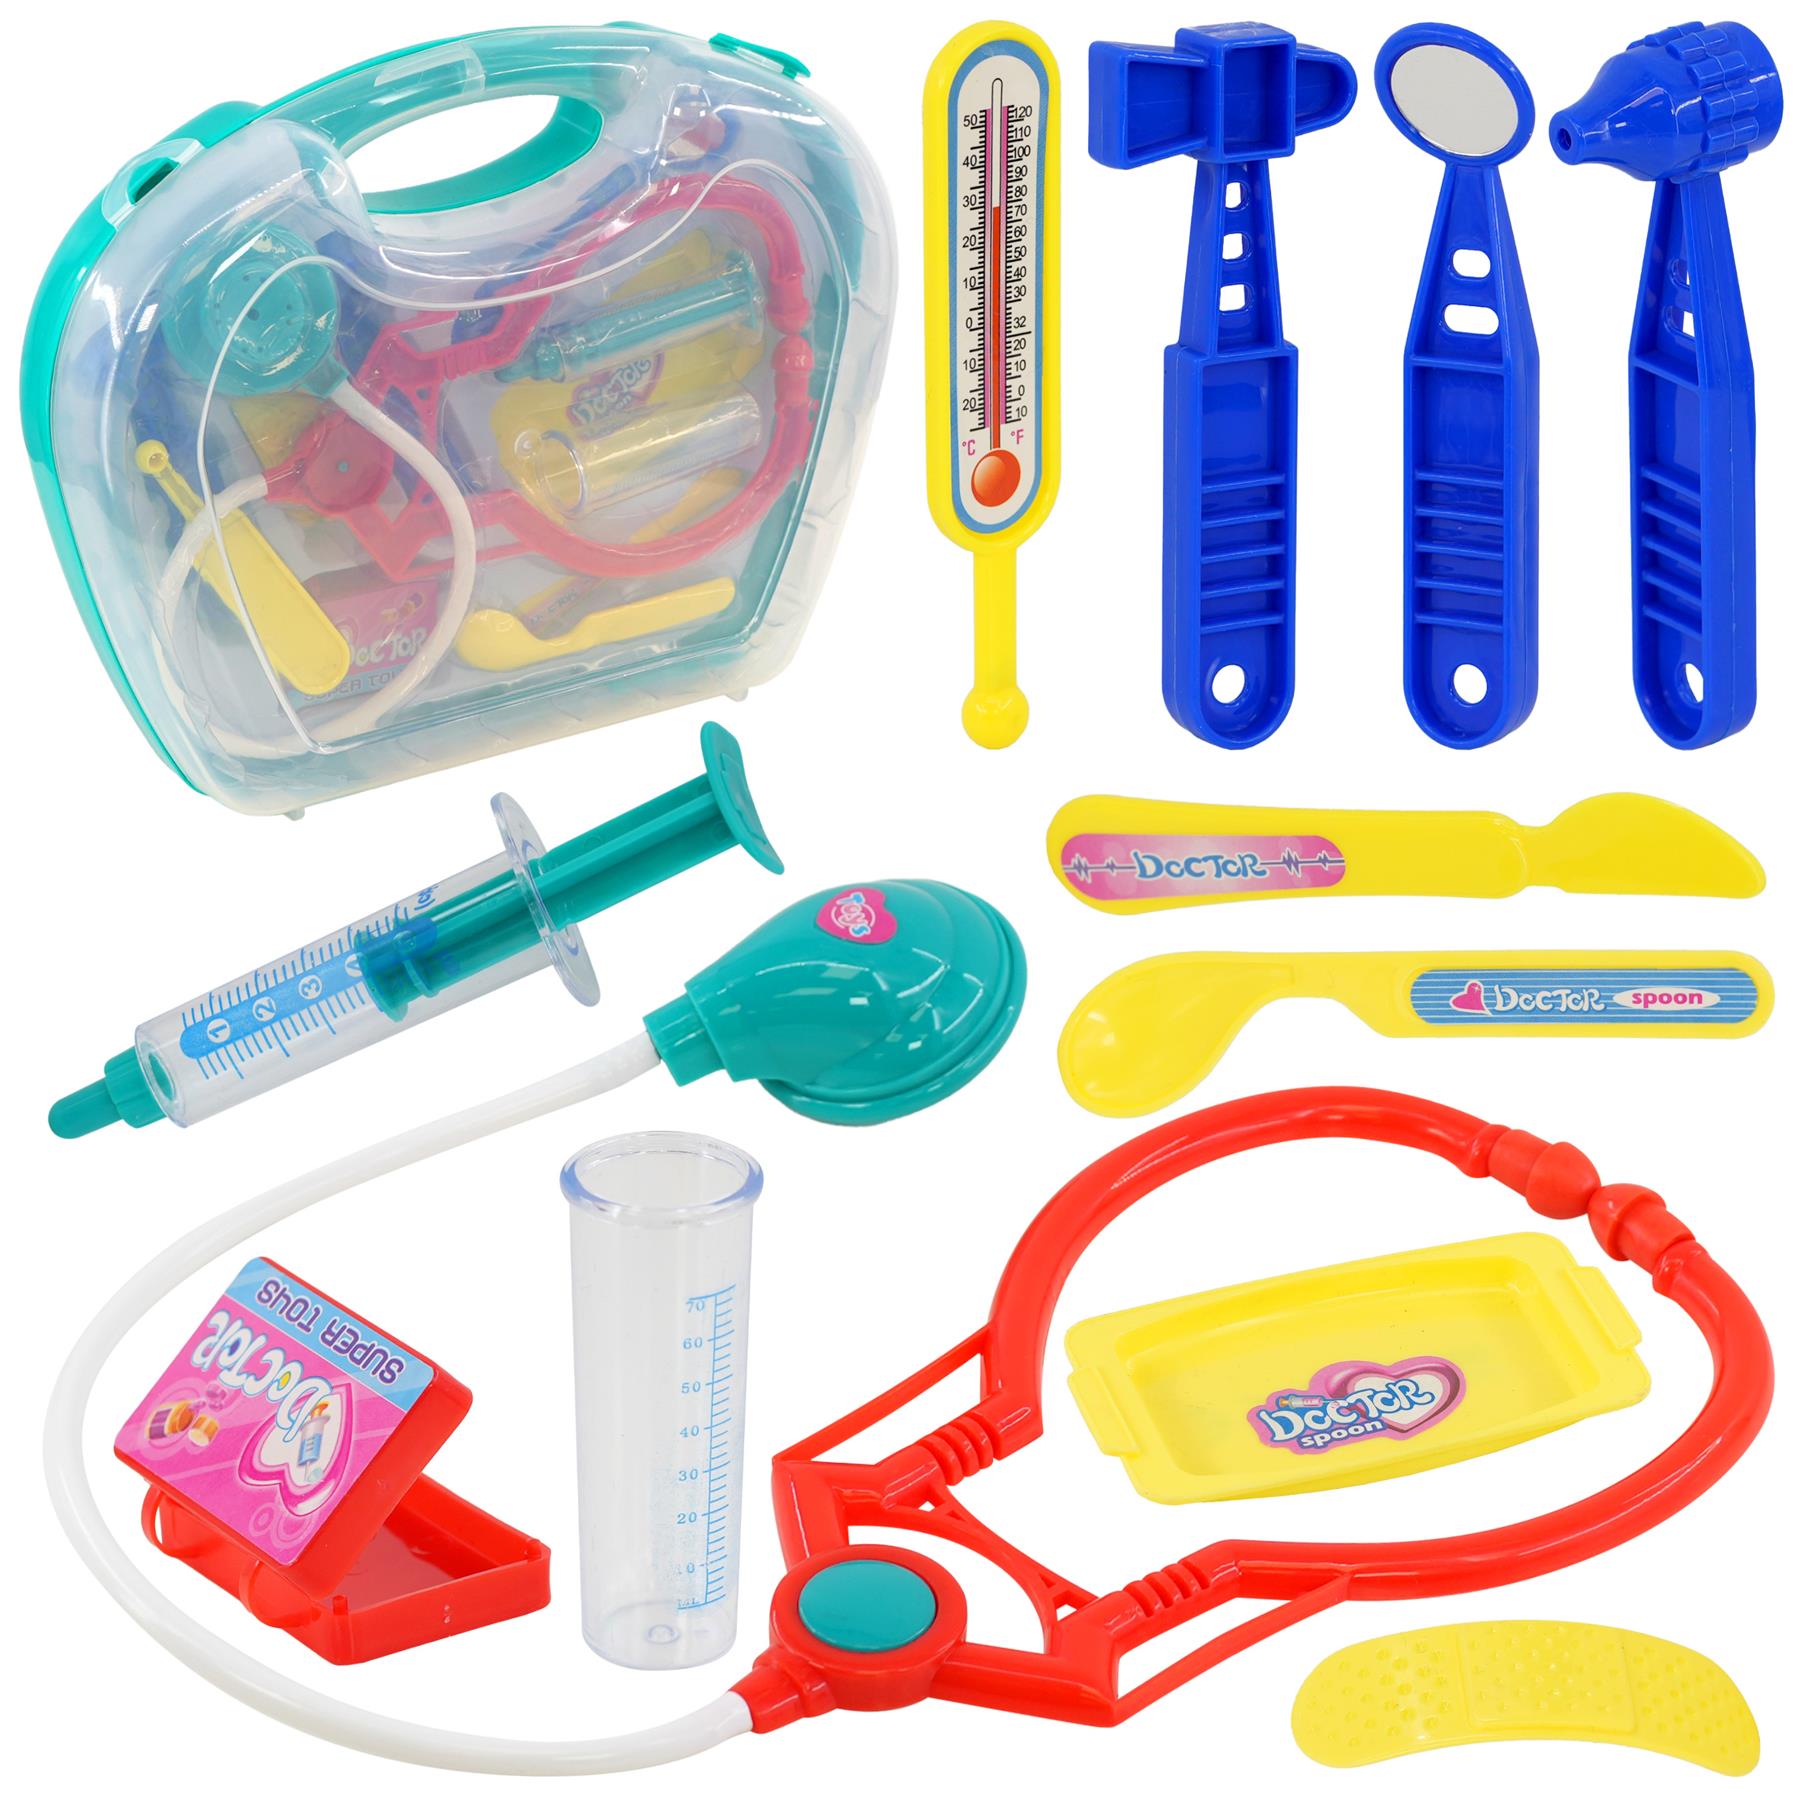 Kids Doctors Set with Carry Case by The Magic Toy Shop - The Magic Toy Shop